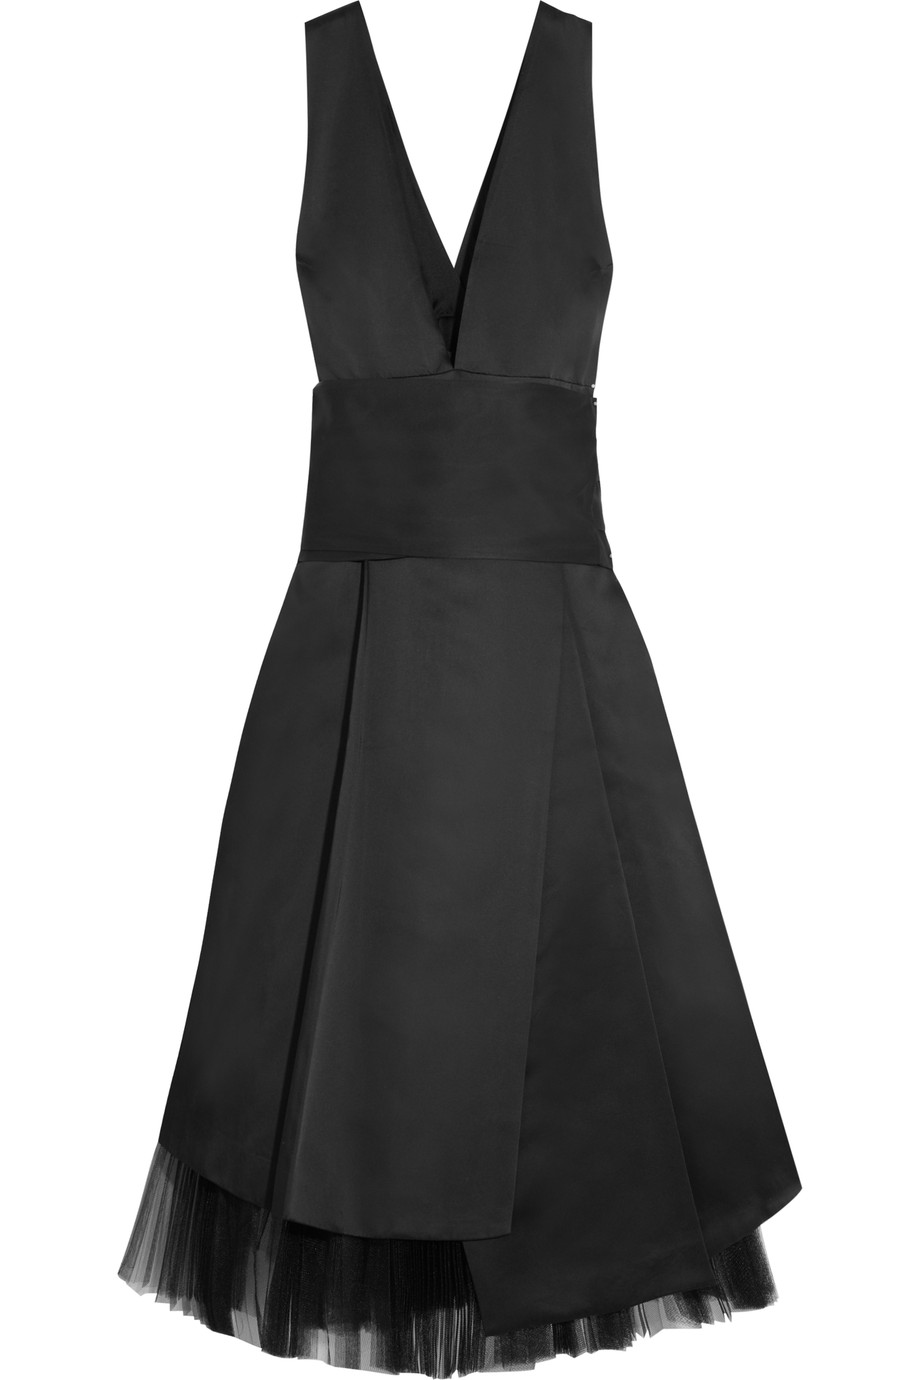 Marc By Marc Jacobs Satin And Tulle Dress | ModeSens